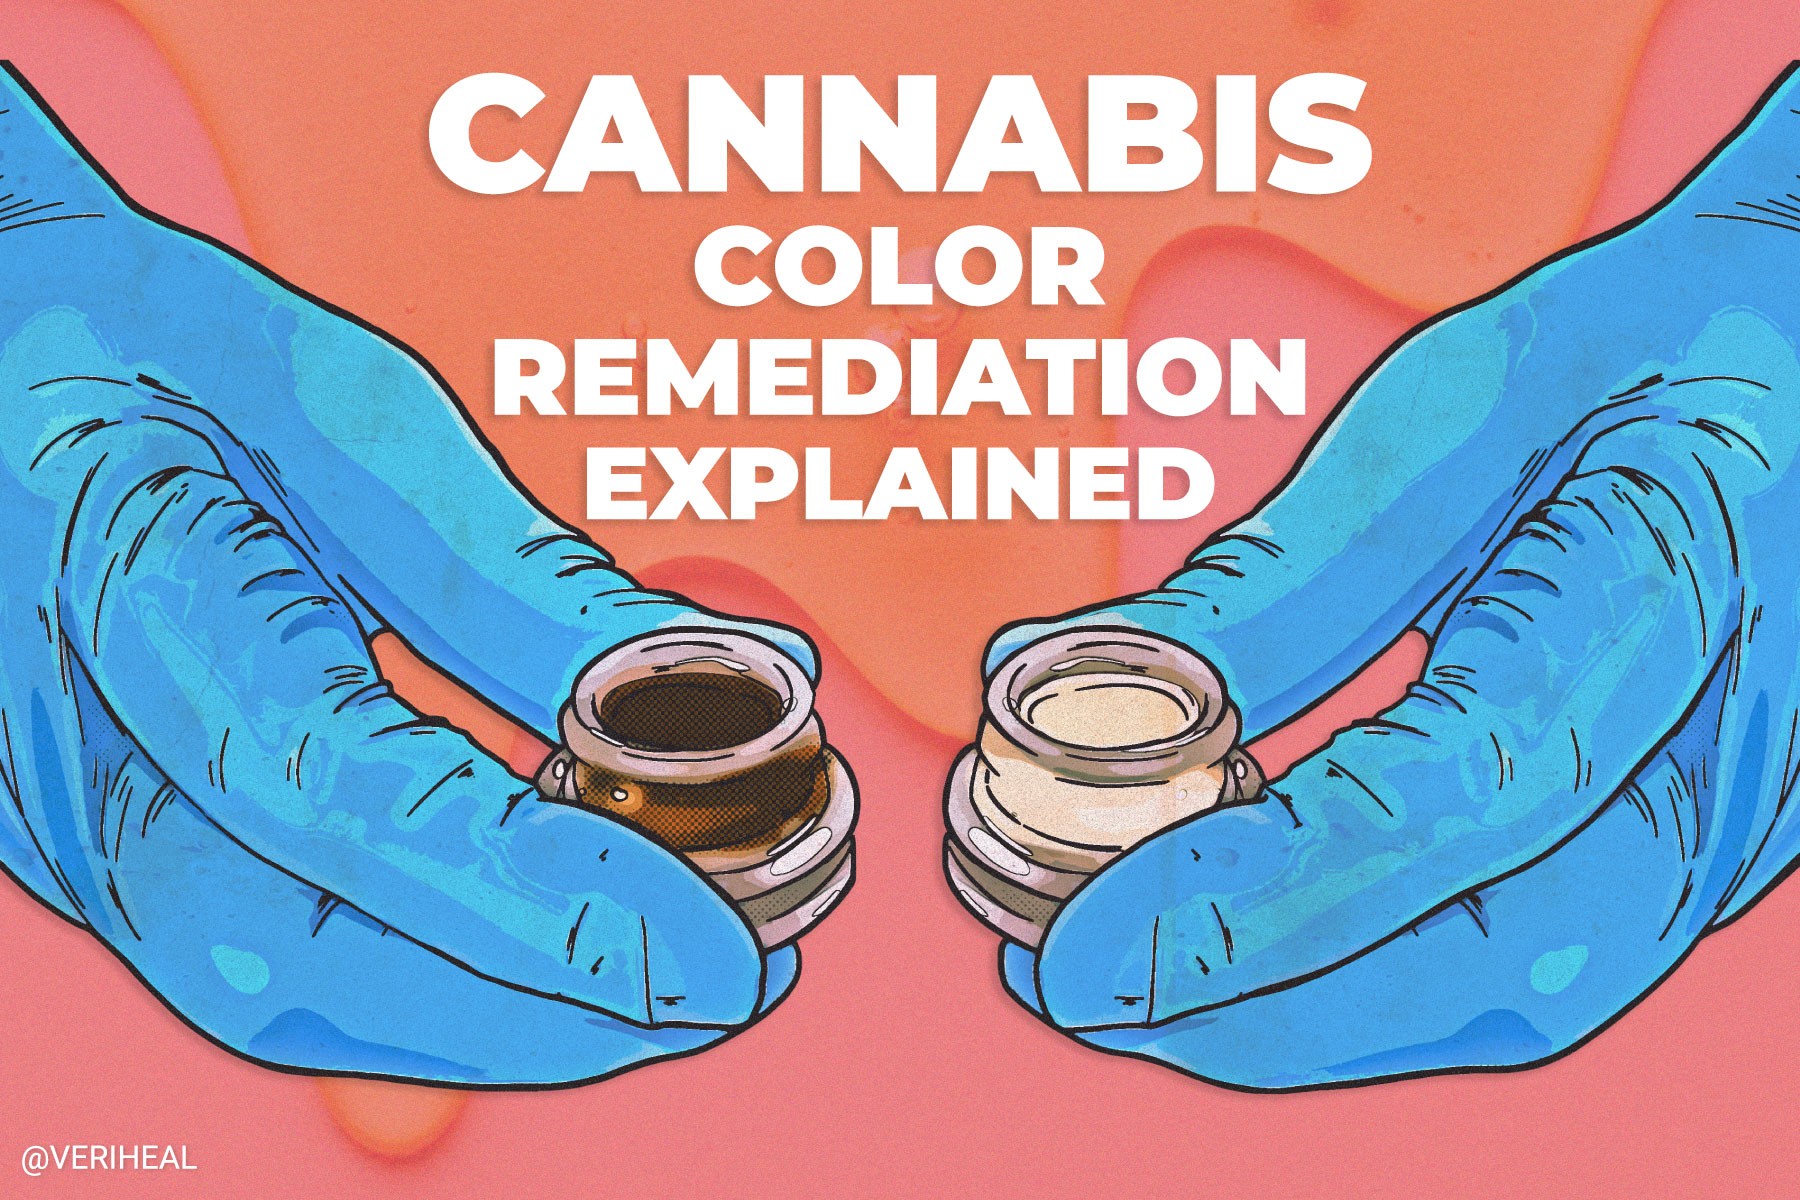 The Colors of Cannabis Extracts Aren’t Always Clear: Color Remediation Explained